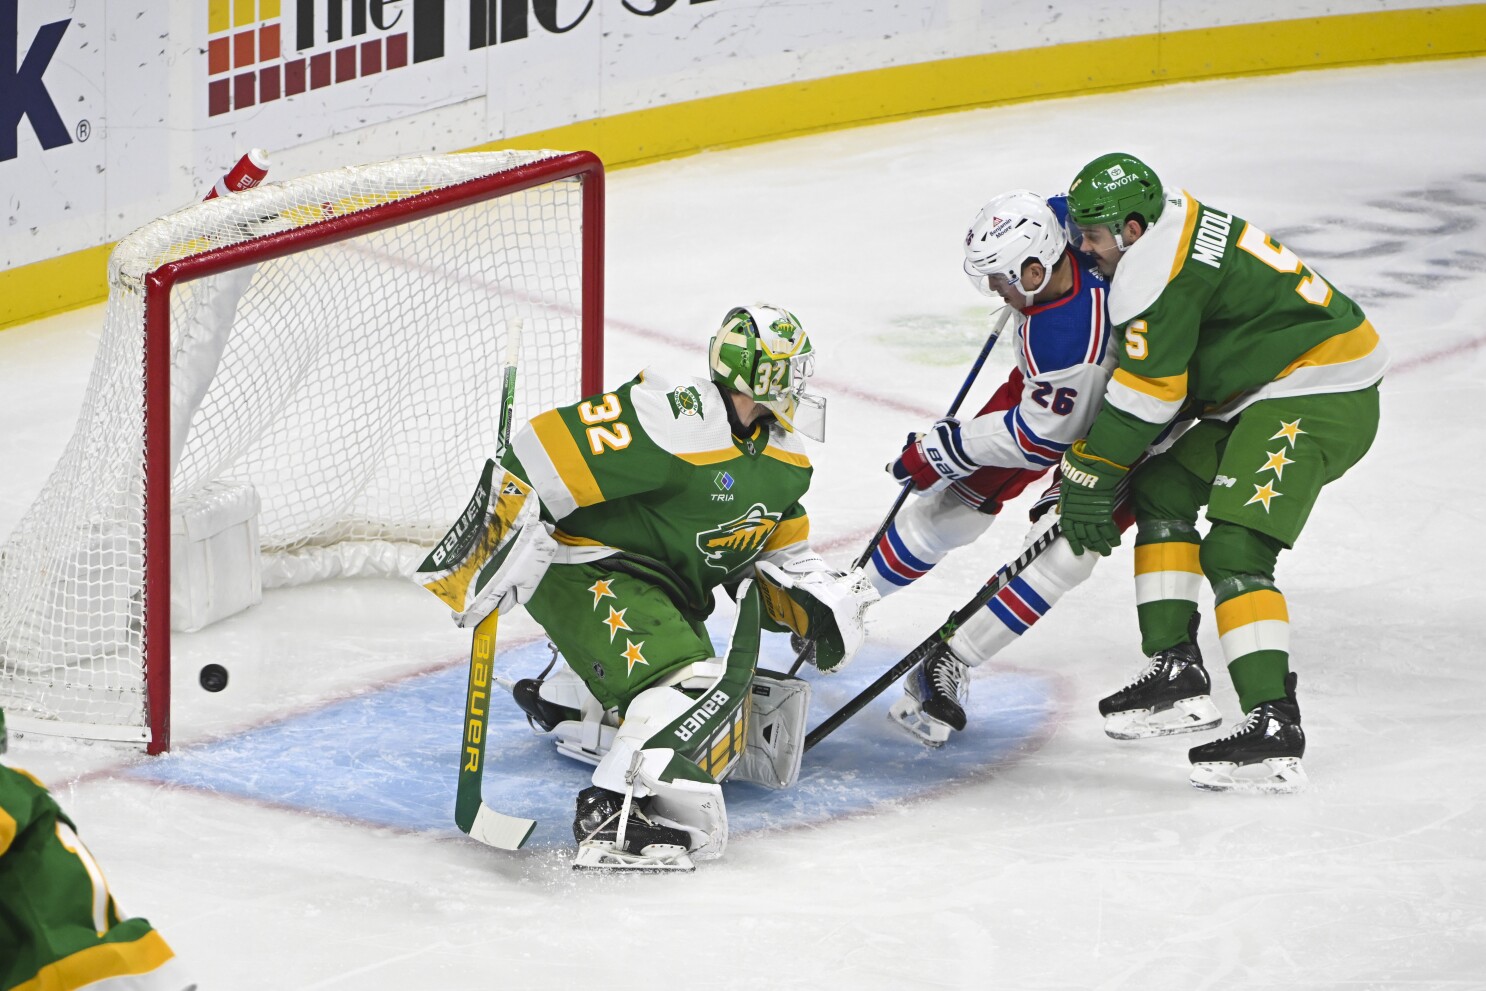 Rangers not up to Panthers' feisty challenge in loss